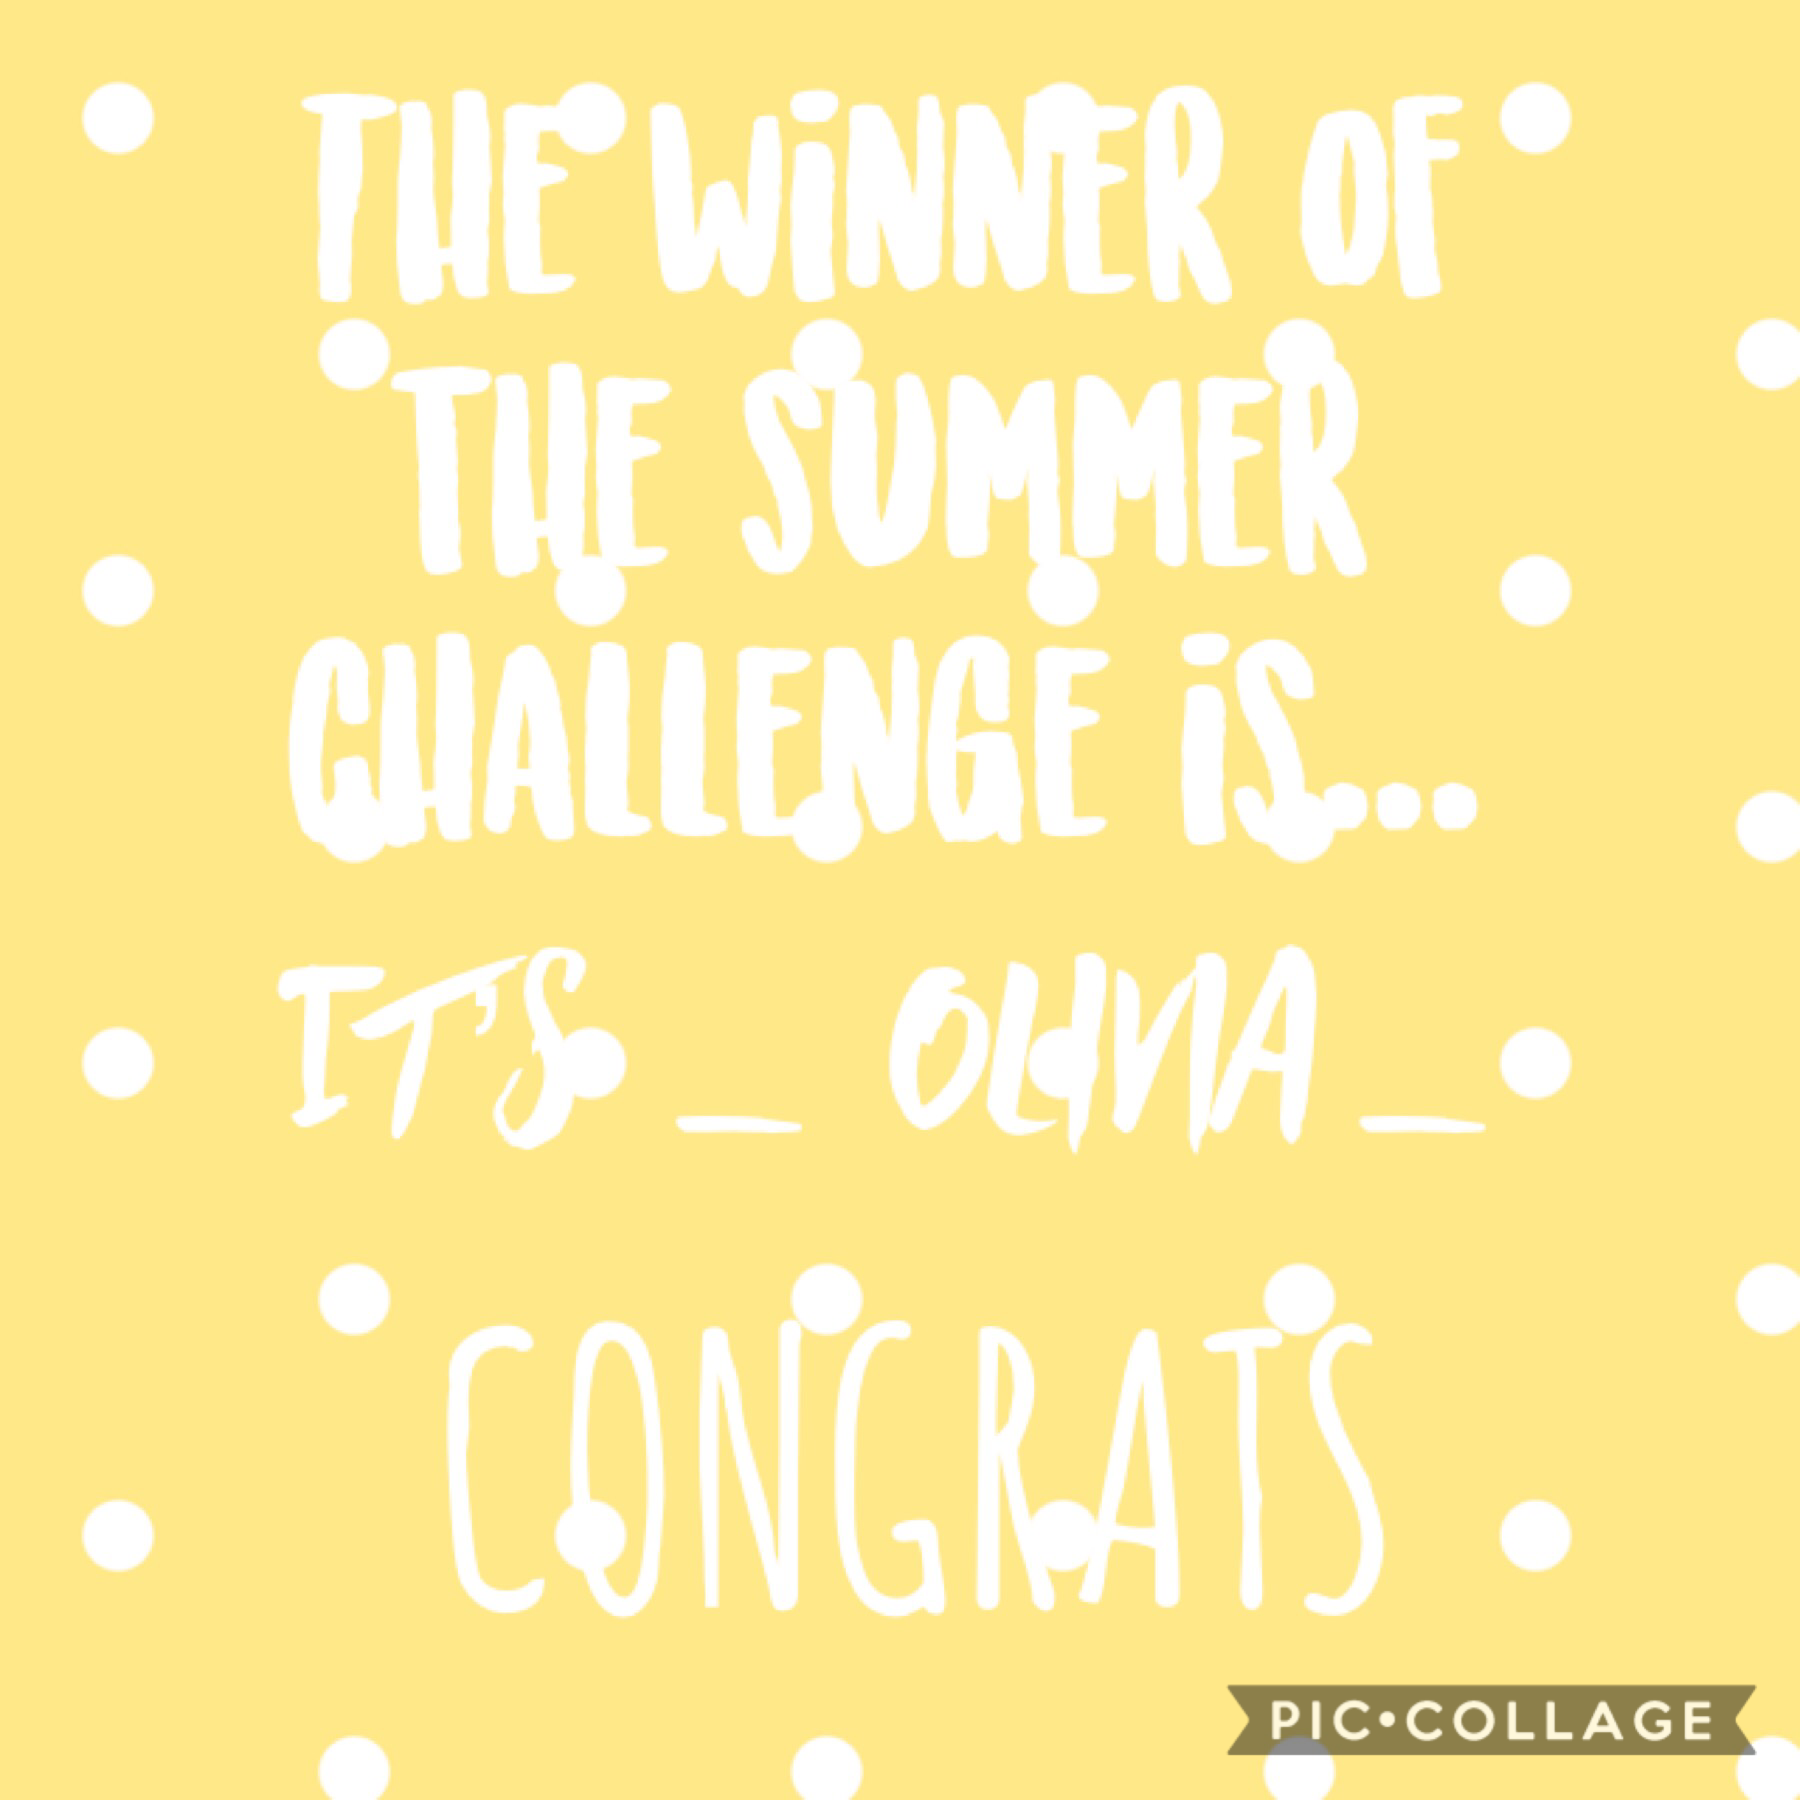 Thank you all for participating in the challenge(s)! Hope you in joy your summer!